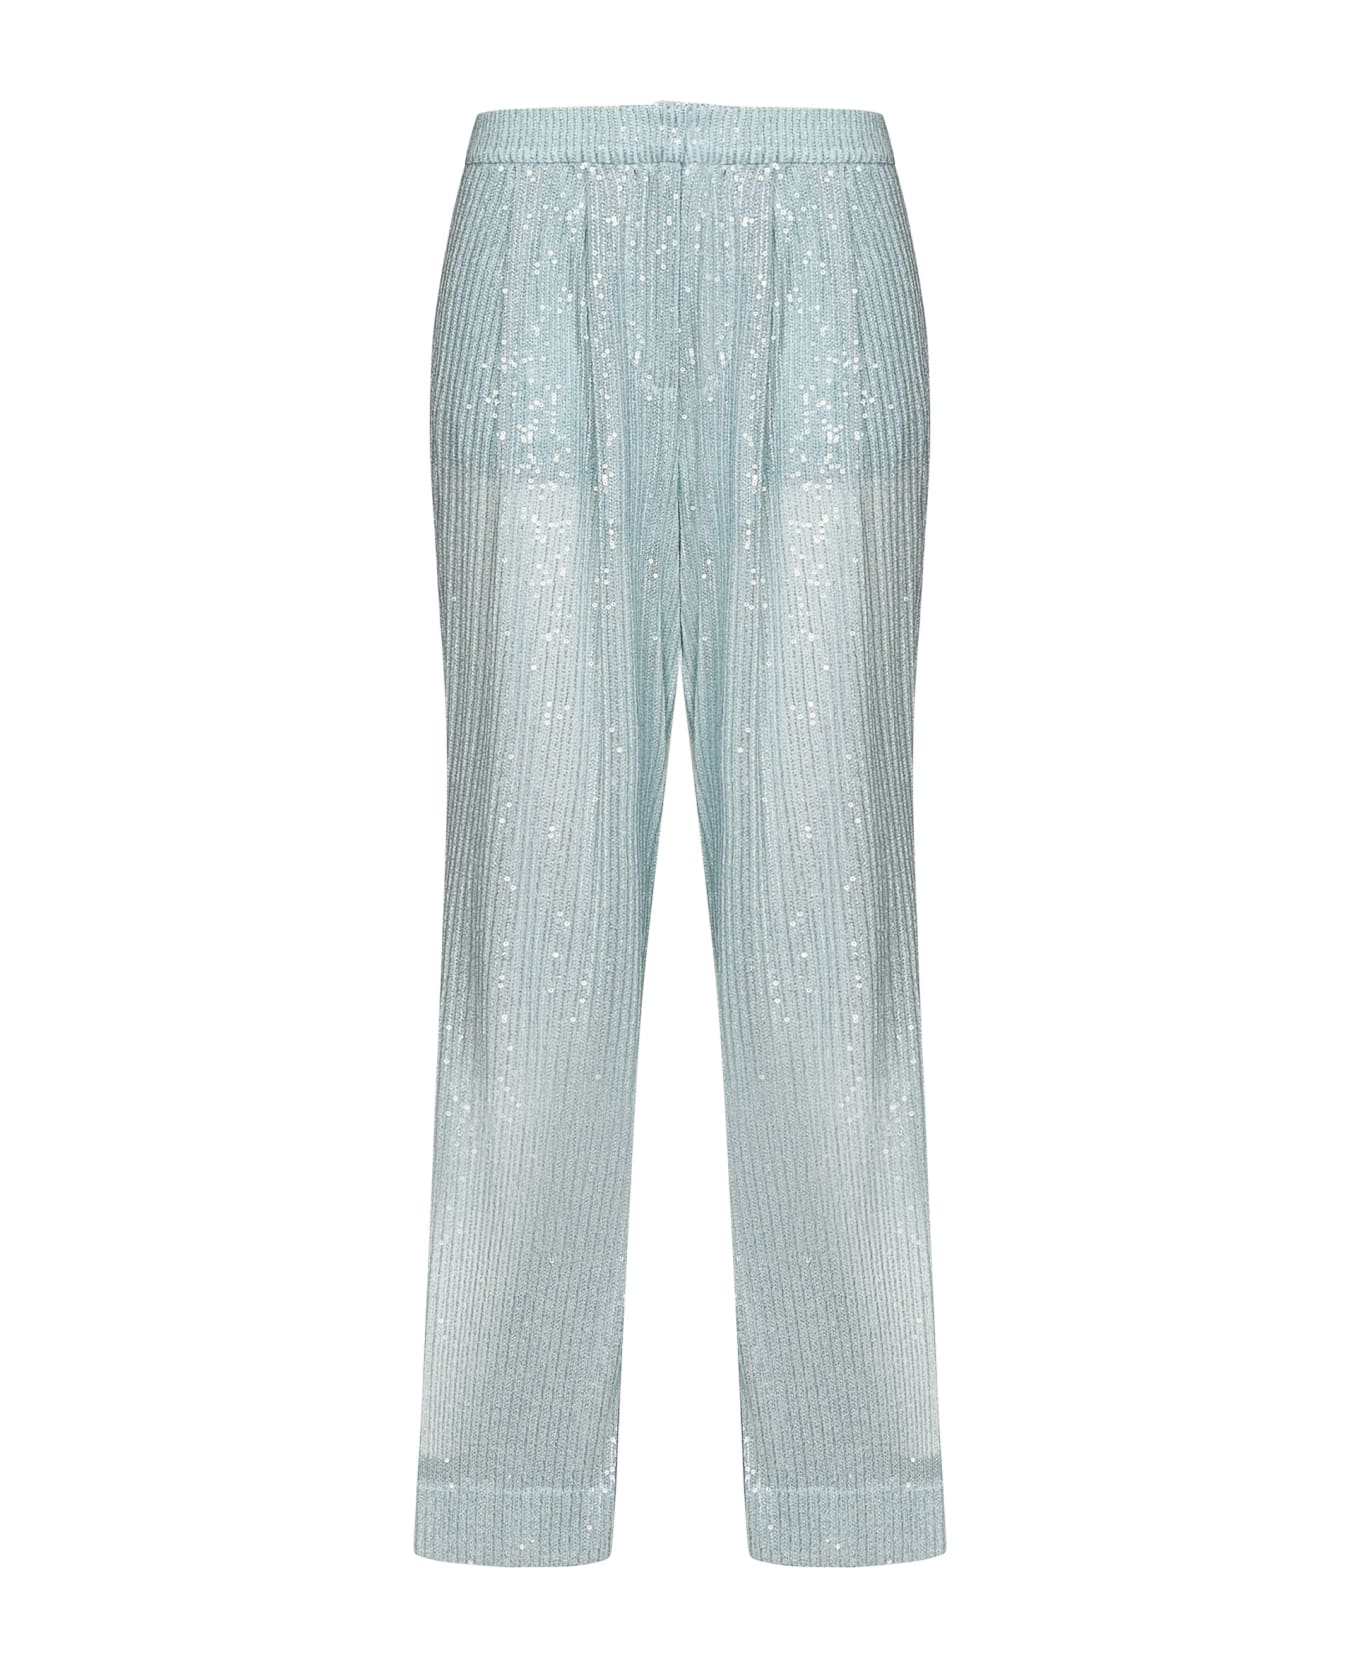 Rotate by Birger Christensen Trousers - Sky Blue